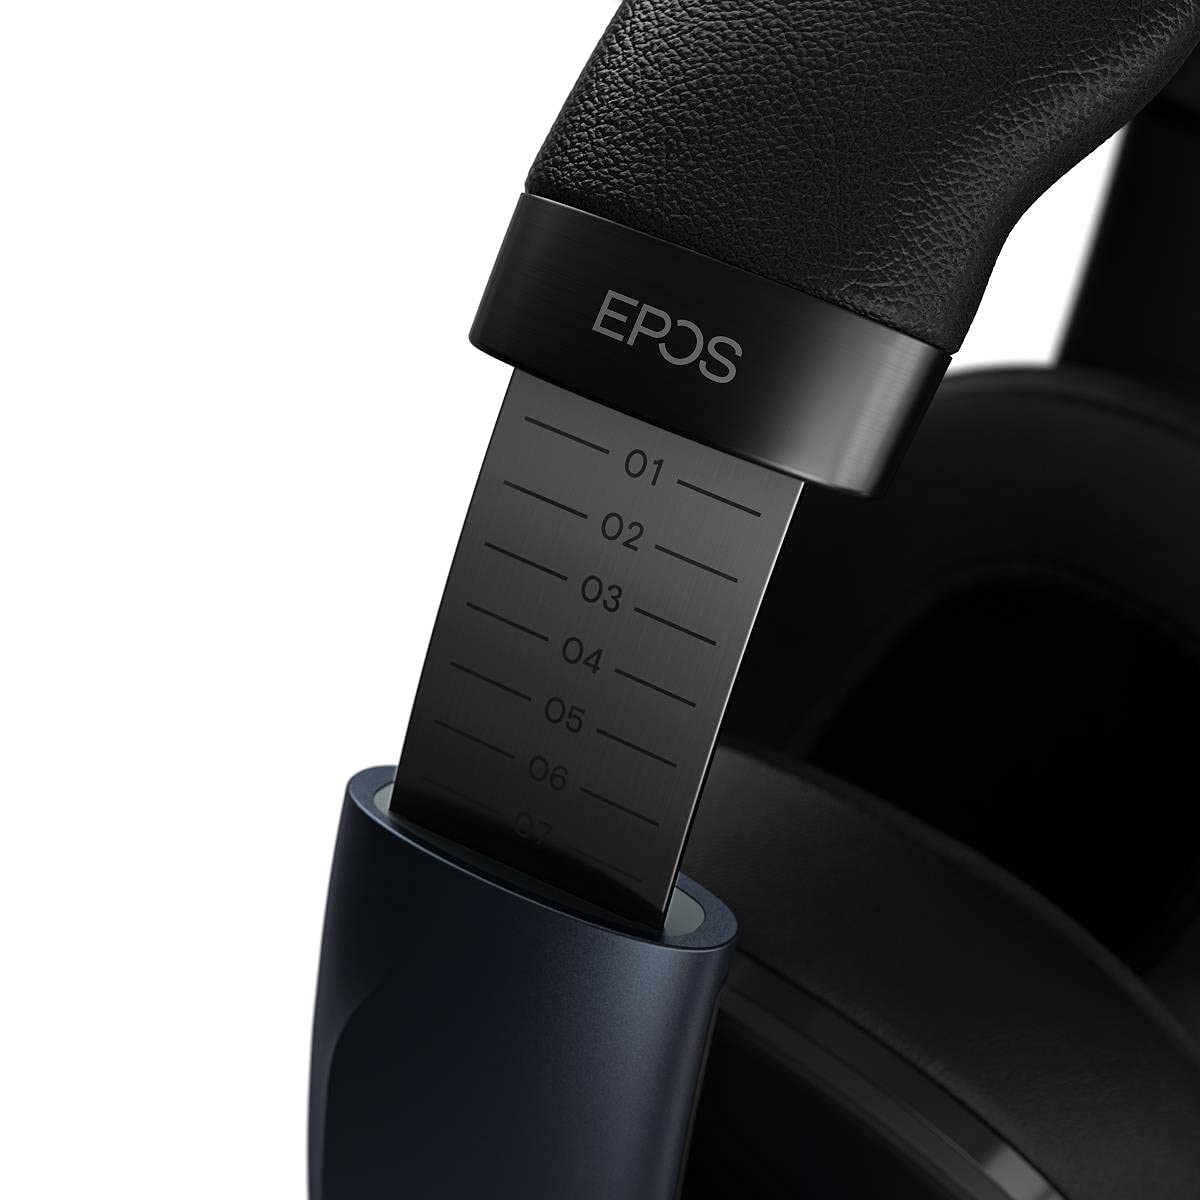 EPOS H6 Pro - Closed Acoustic Gaming Headset with Mic - Over-Ear Headset – Lightweight - Lift-to-Mute (Black)